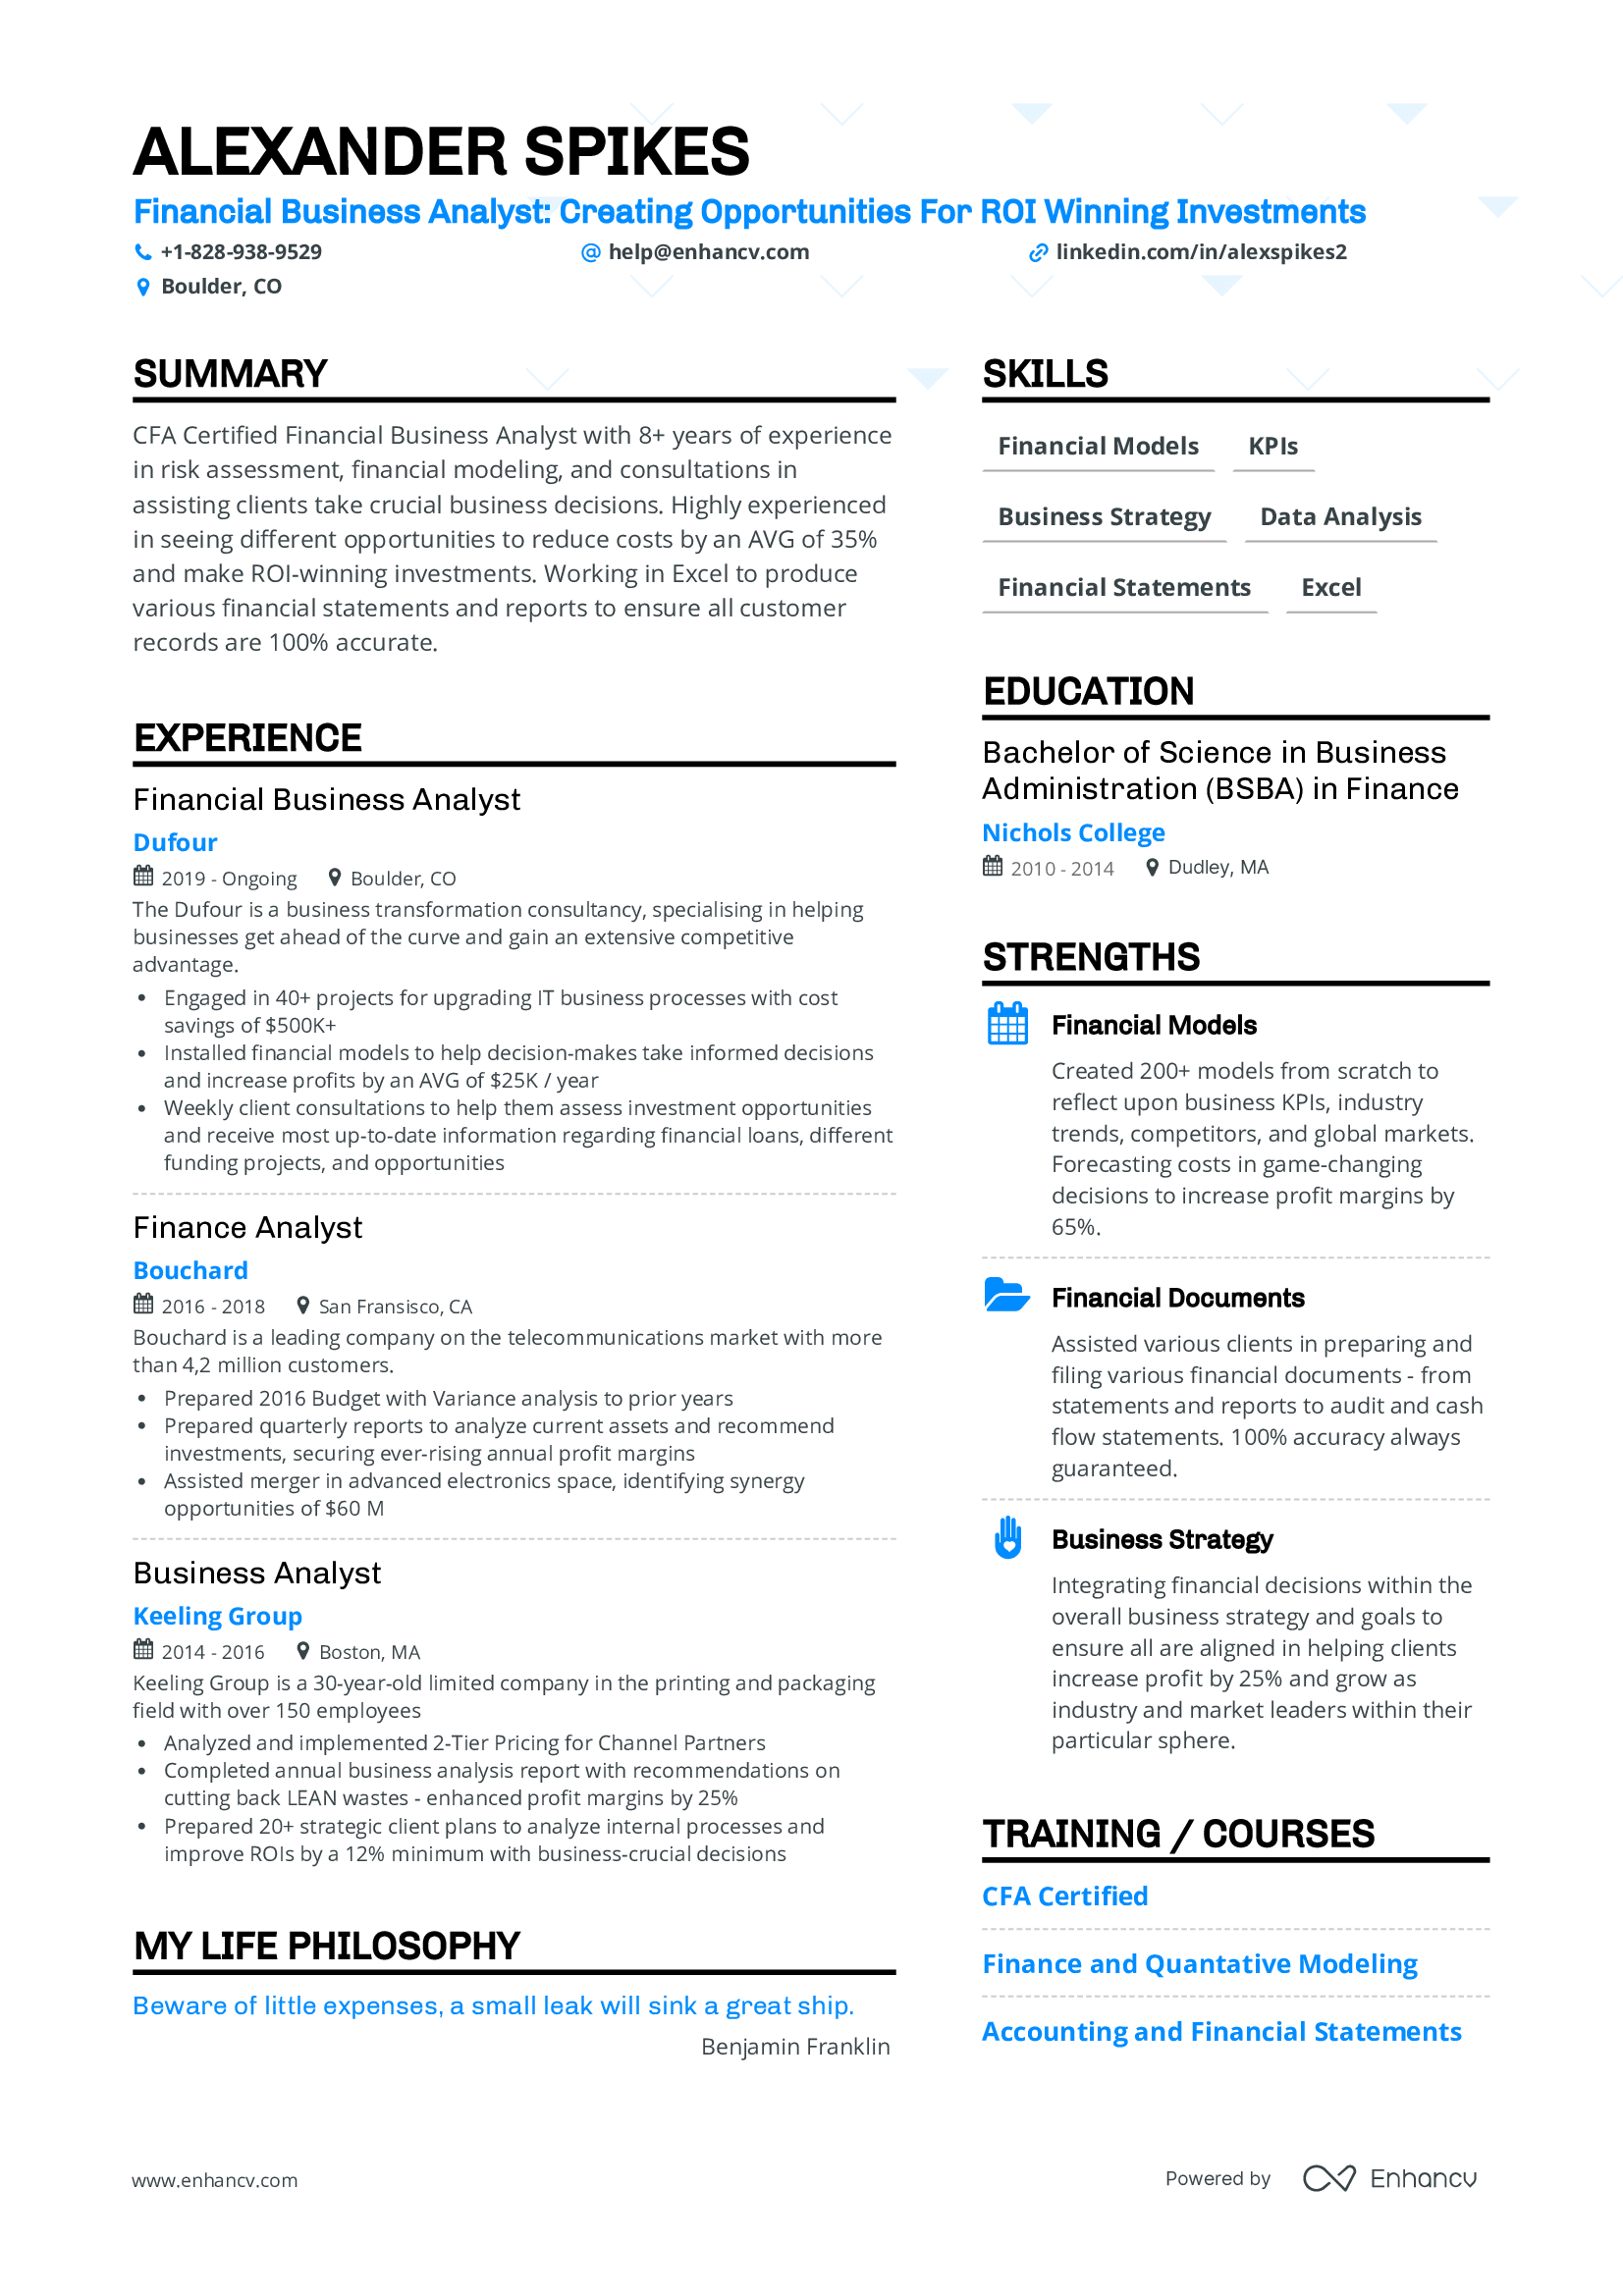 Financial Business Analyst resume.png